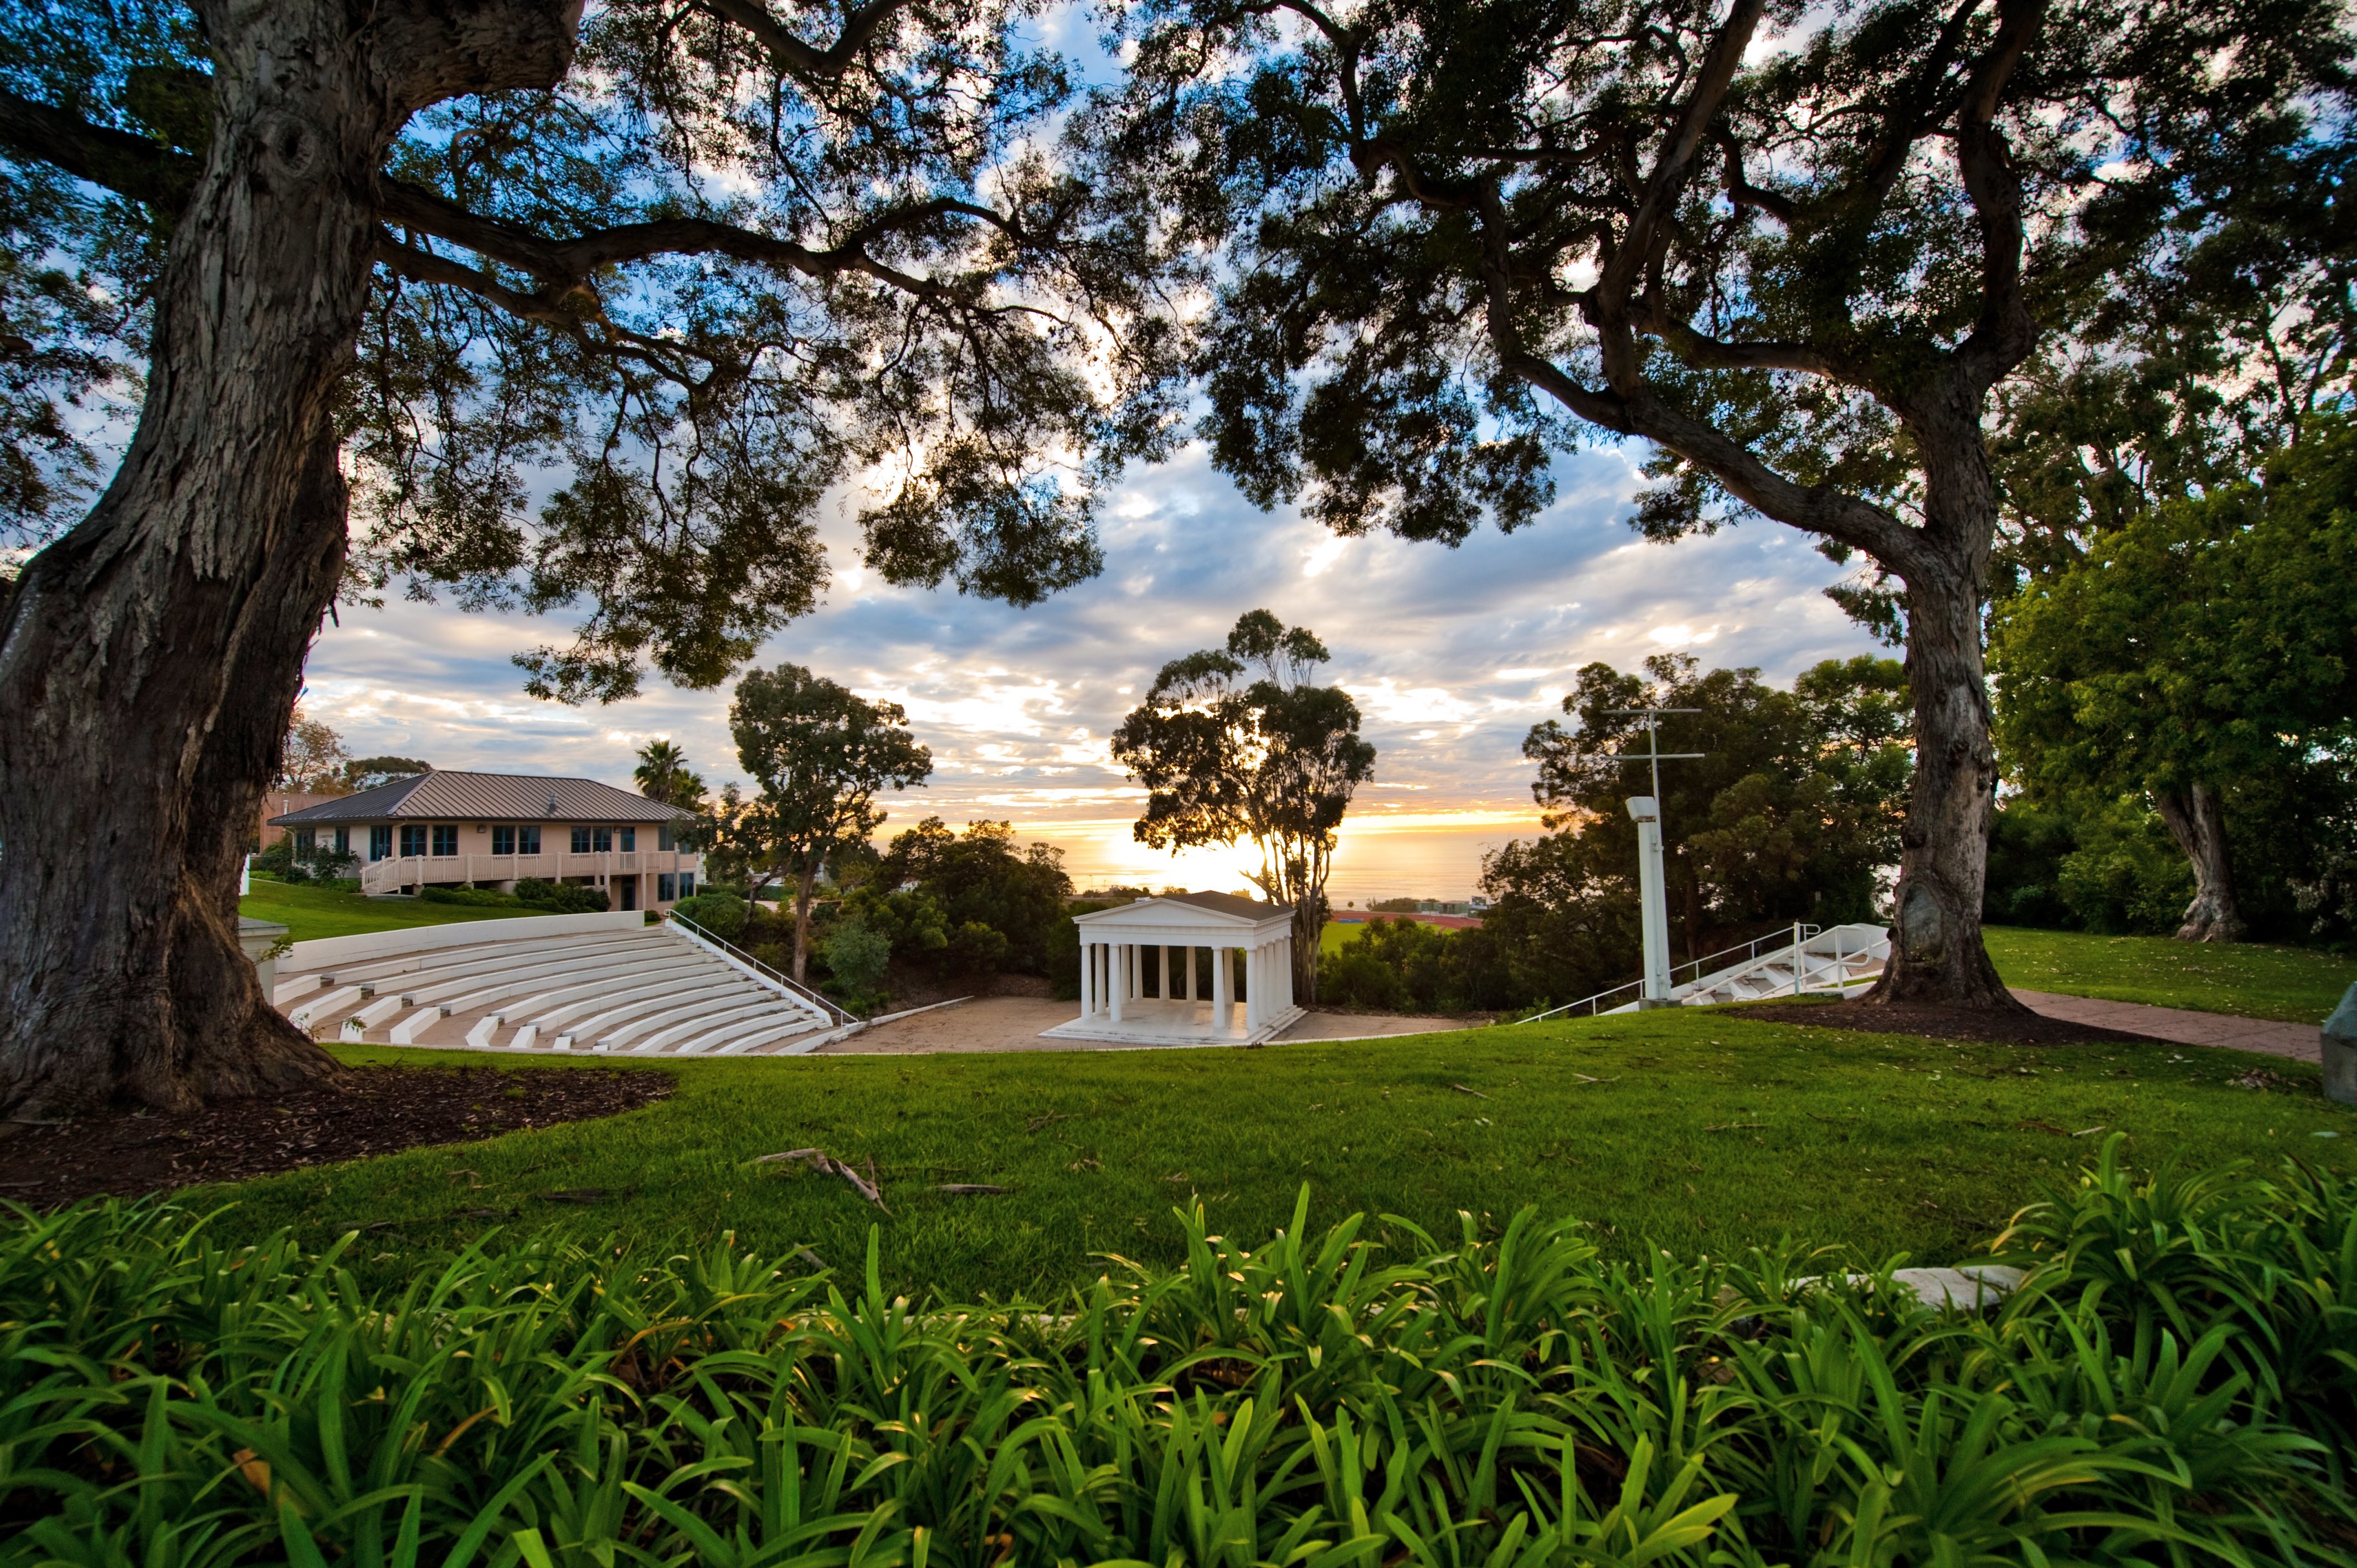 PLNU Gets in Top 50 for Best Christian Colleges in US